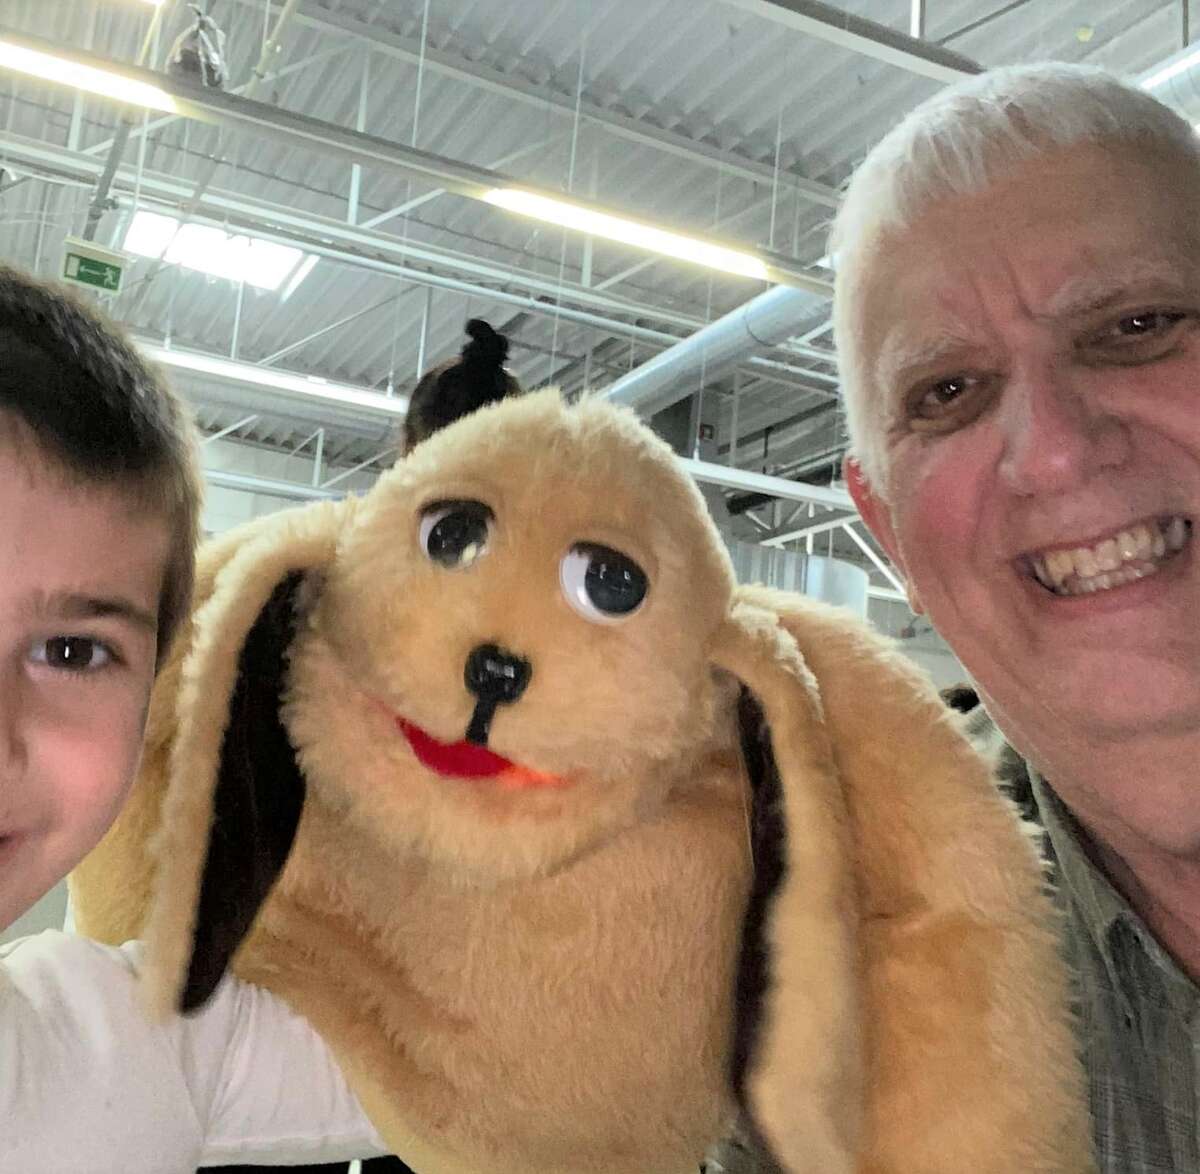 Unites States Army Veteran Bruce Reges (pictured right) recently traveled to Warsaw, Poland to bring displaced refugee children joy with puppets through his initiative he began 15 years ago, Peace Through Puppets. 